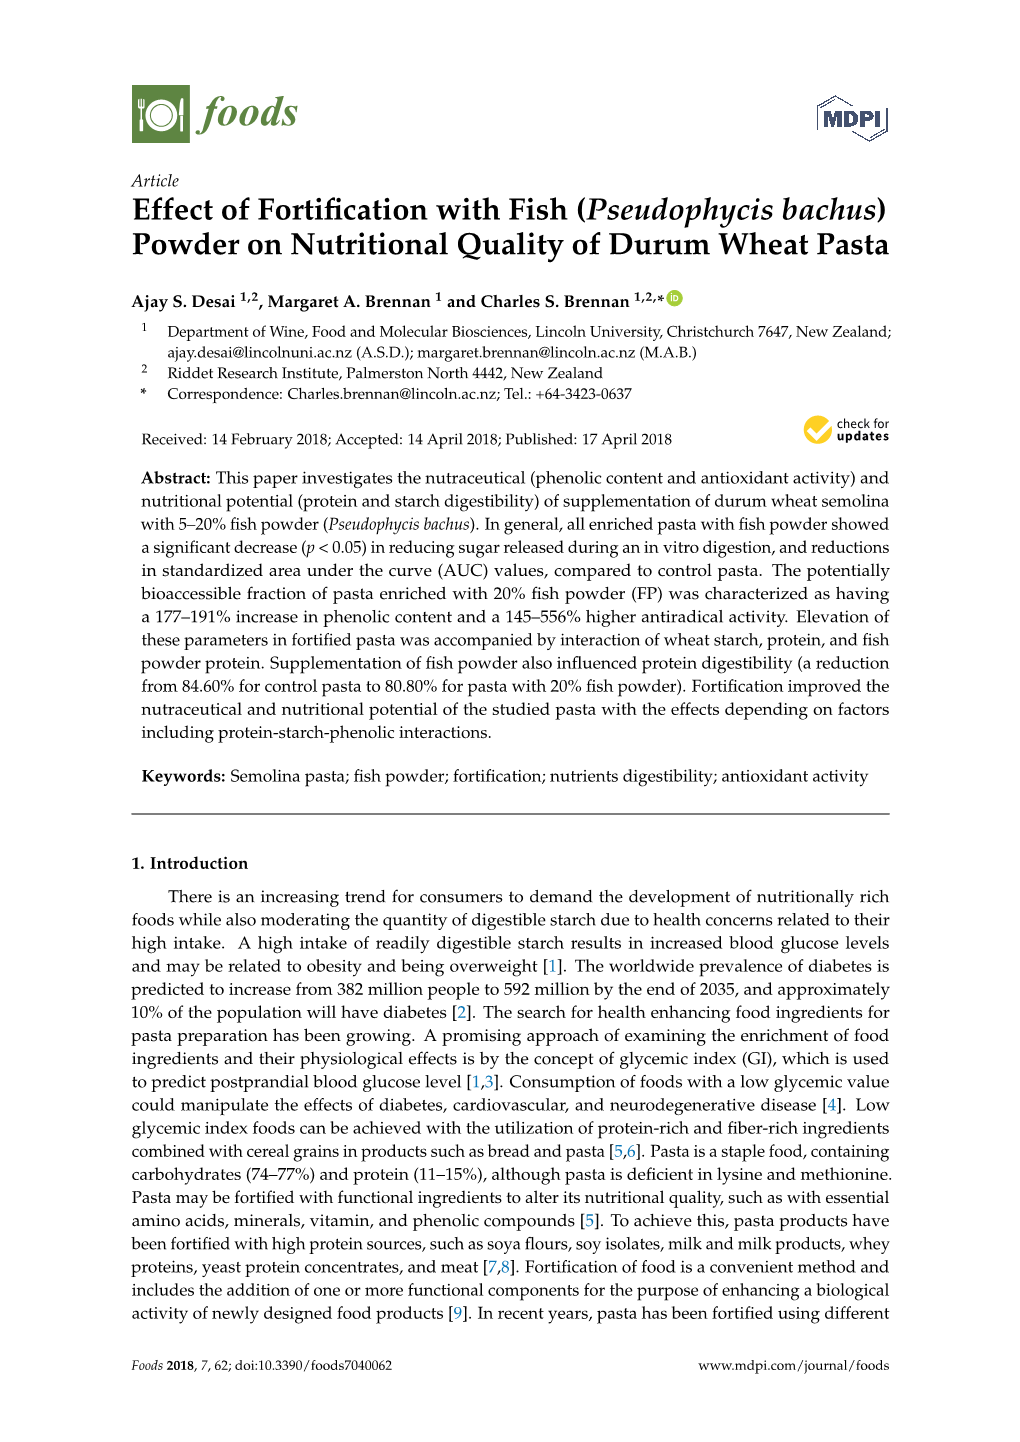 (Pseudophycis Bachus) Powder on Nutritional Quality of Durum Wheat Pasta